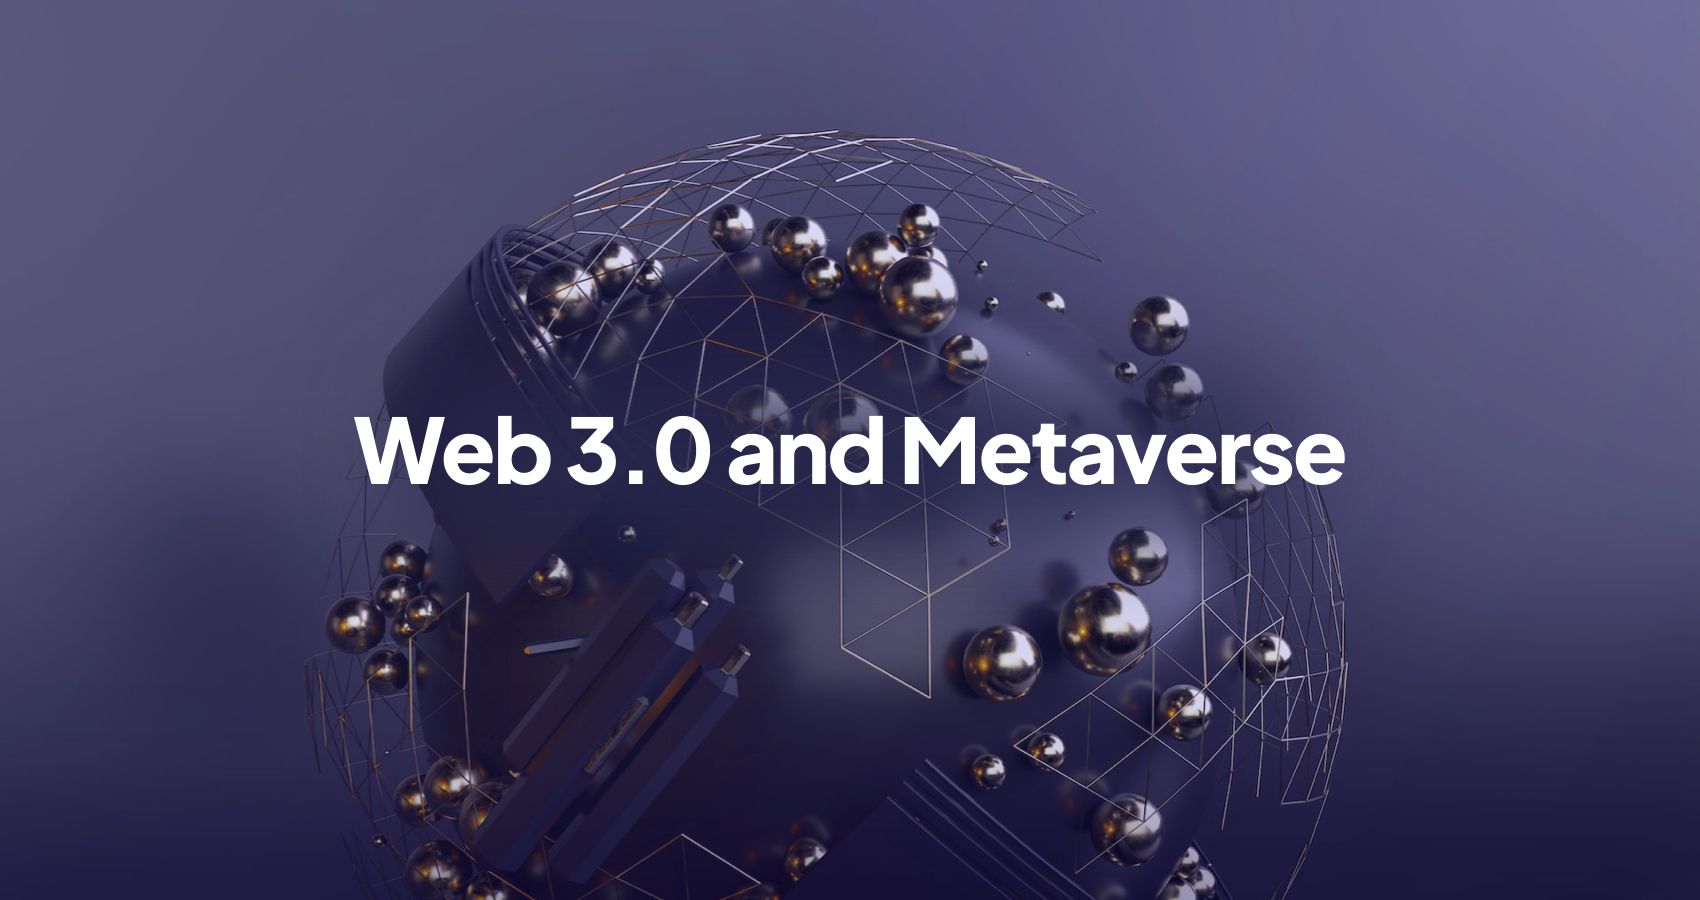 The Metaverse: How it will end the Internet